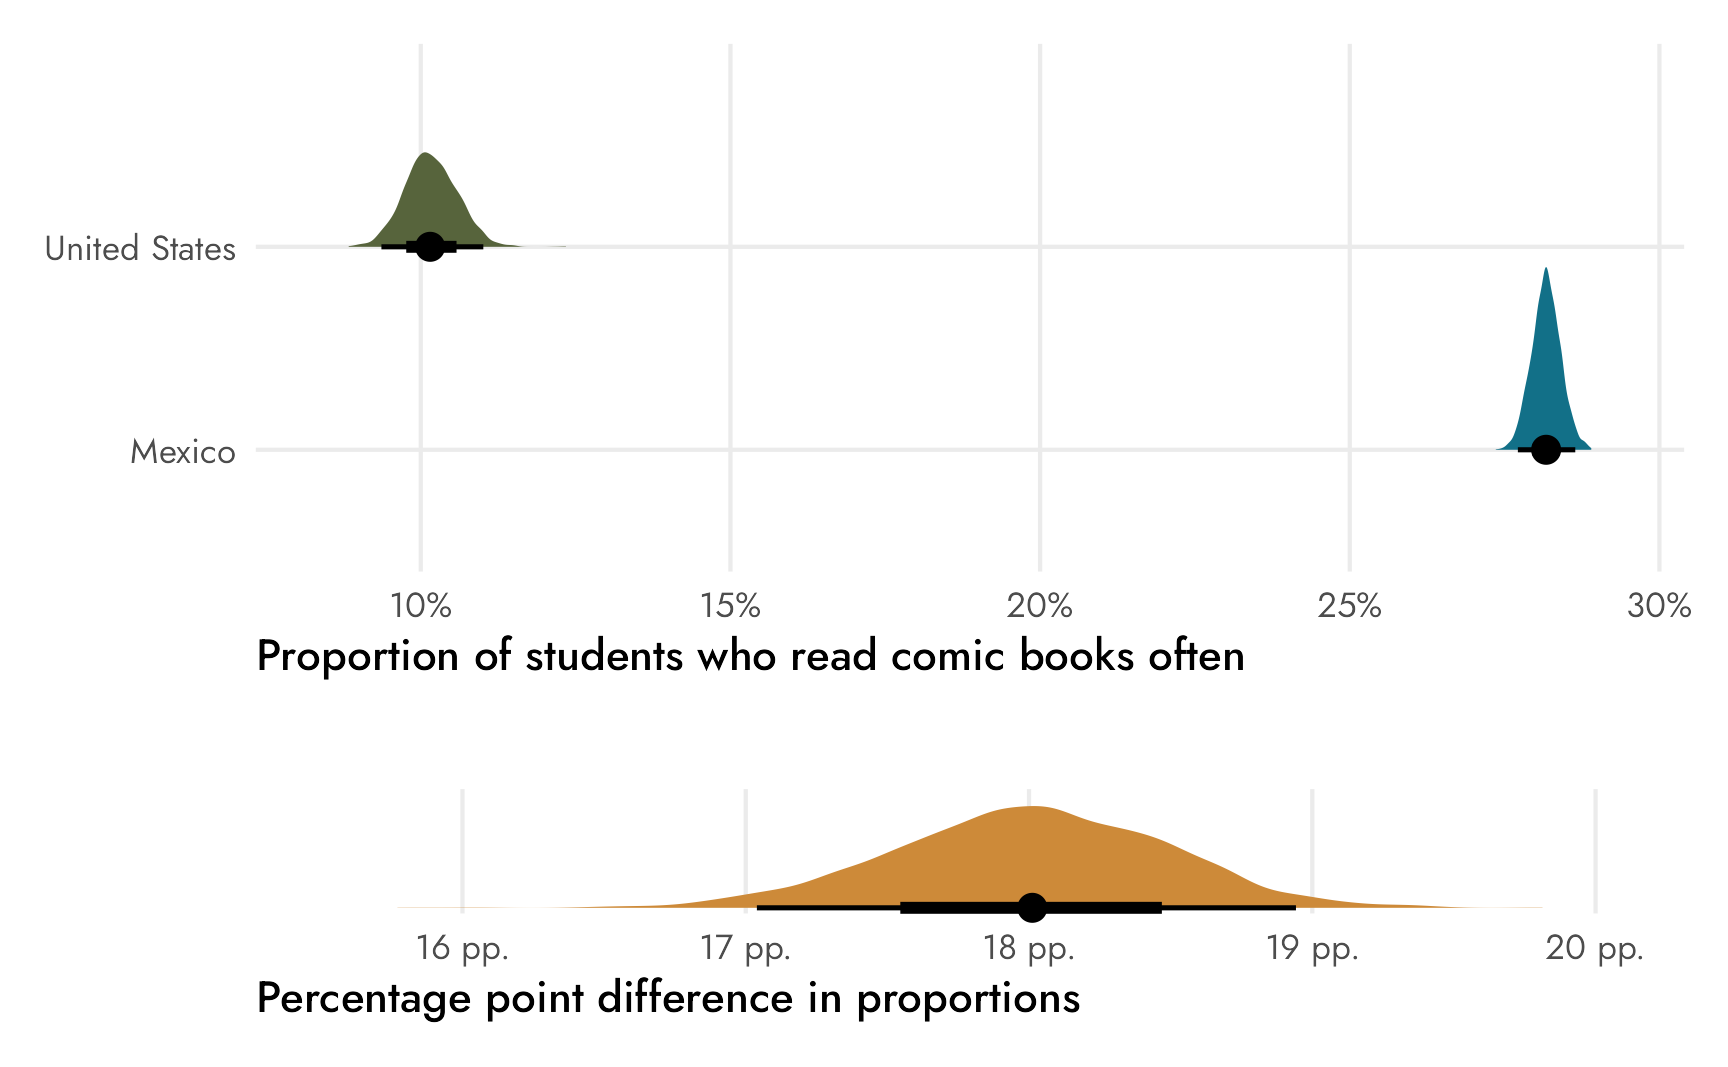 Posterior distribution of the proportions and difference in proportions of students who read comic books often in the United States and Mexico; results from logistic regression model in {brms}